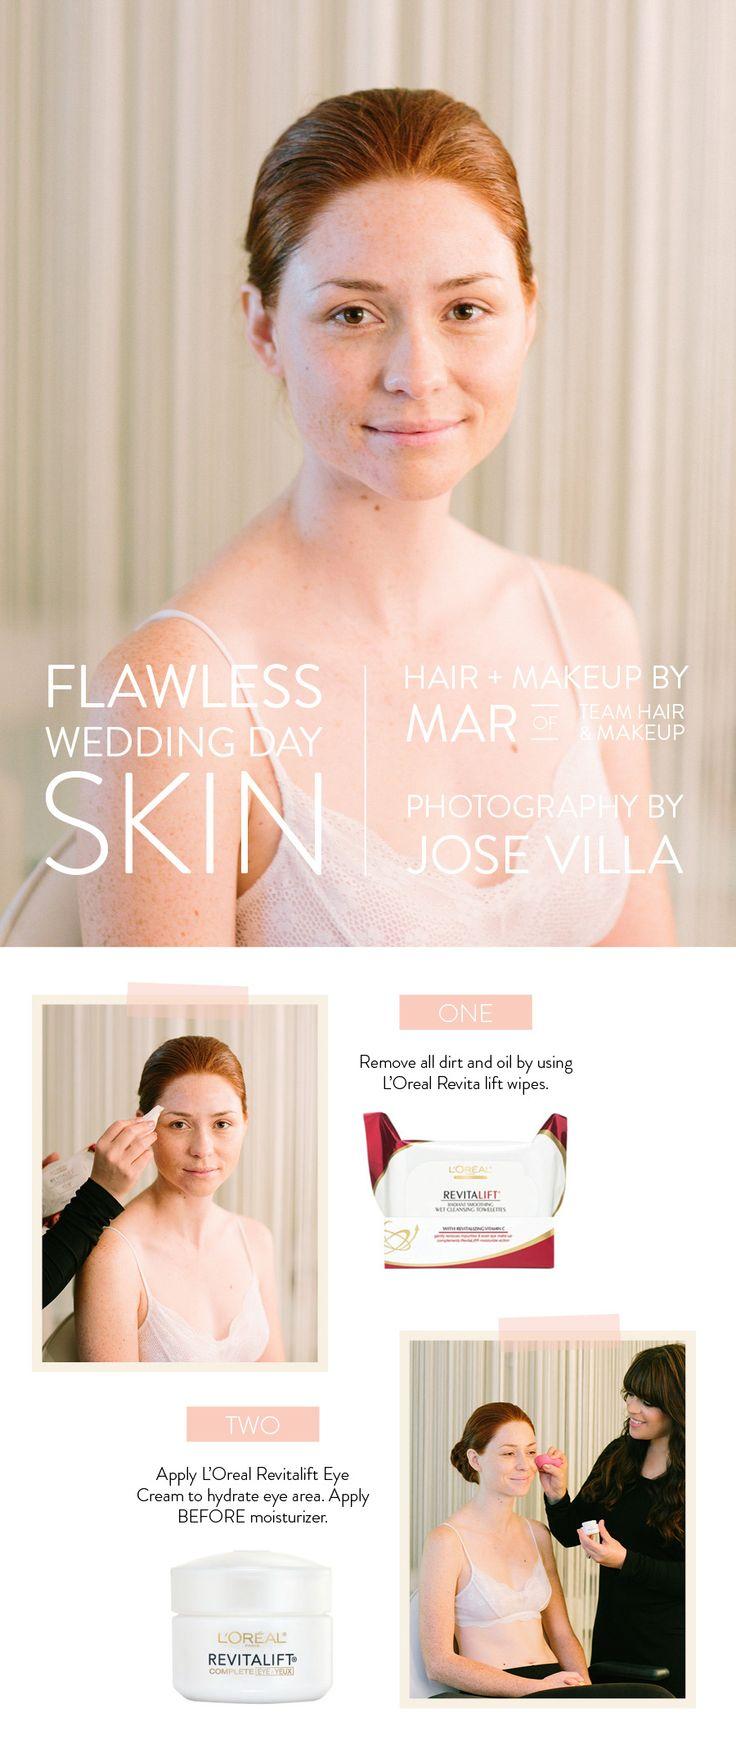 Wedding - Wedding Day Skin Tips From TEAM Hair And Makeup